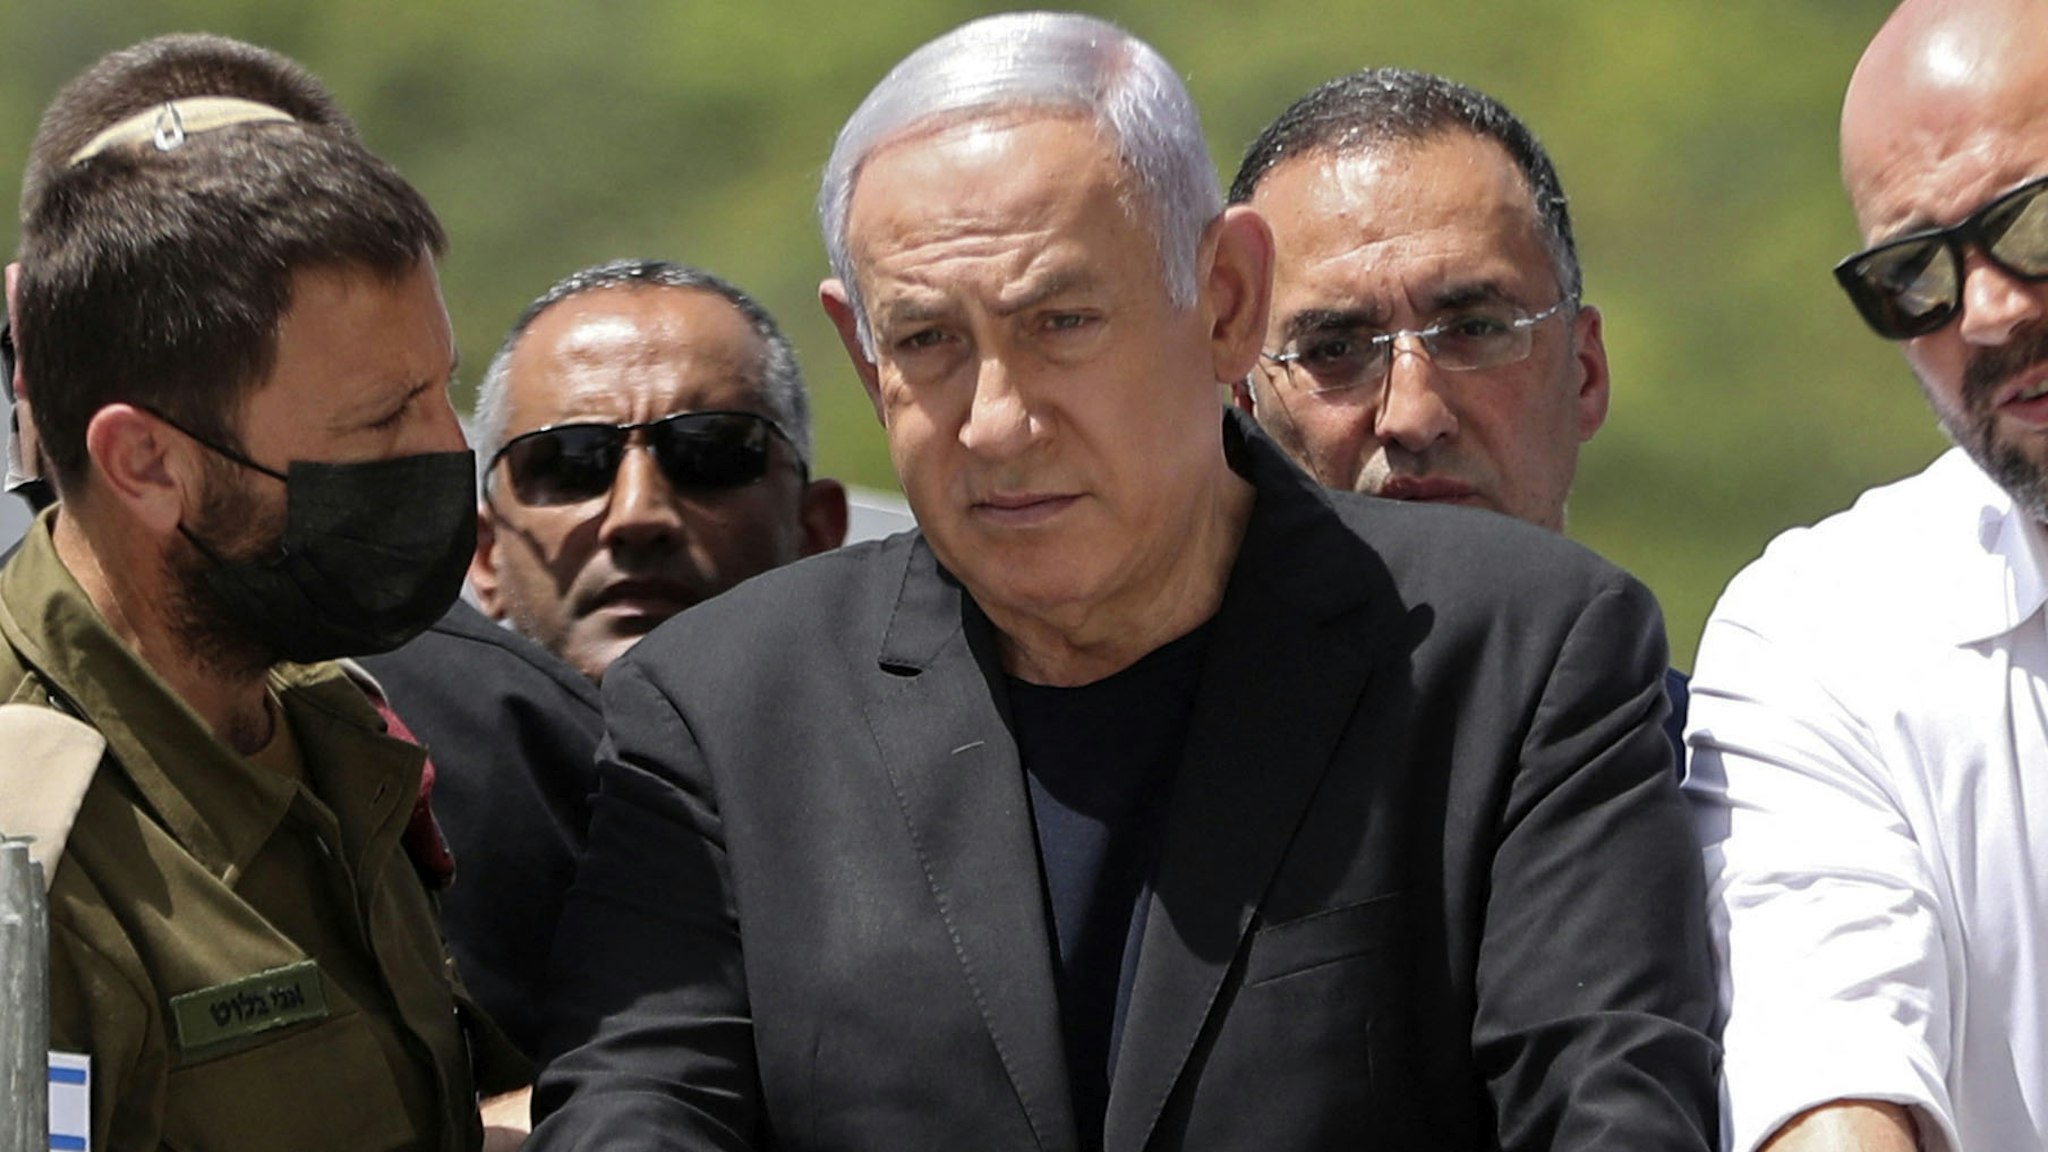 Israeli Prime Minister Benjamin Netanyahu (C) visits the site of an overnight stampede during an ultra-Orthodox religious gathering in the northern Israeli town of Meron, on April 30, 2021. - The massive stampede at the densely-packed site near the reputed tomb of Rabbi Shimon Bar Yochai, a second-century Talmudic sage, where mainly ultra-Orthodox Jews flock to mark the Lag BaOmer holiday, killed at least 44 people in northern Israel, blackening the country's largest COVID-era gathering.